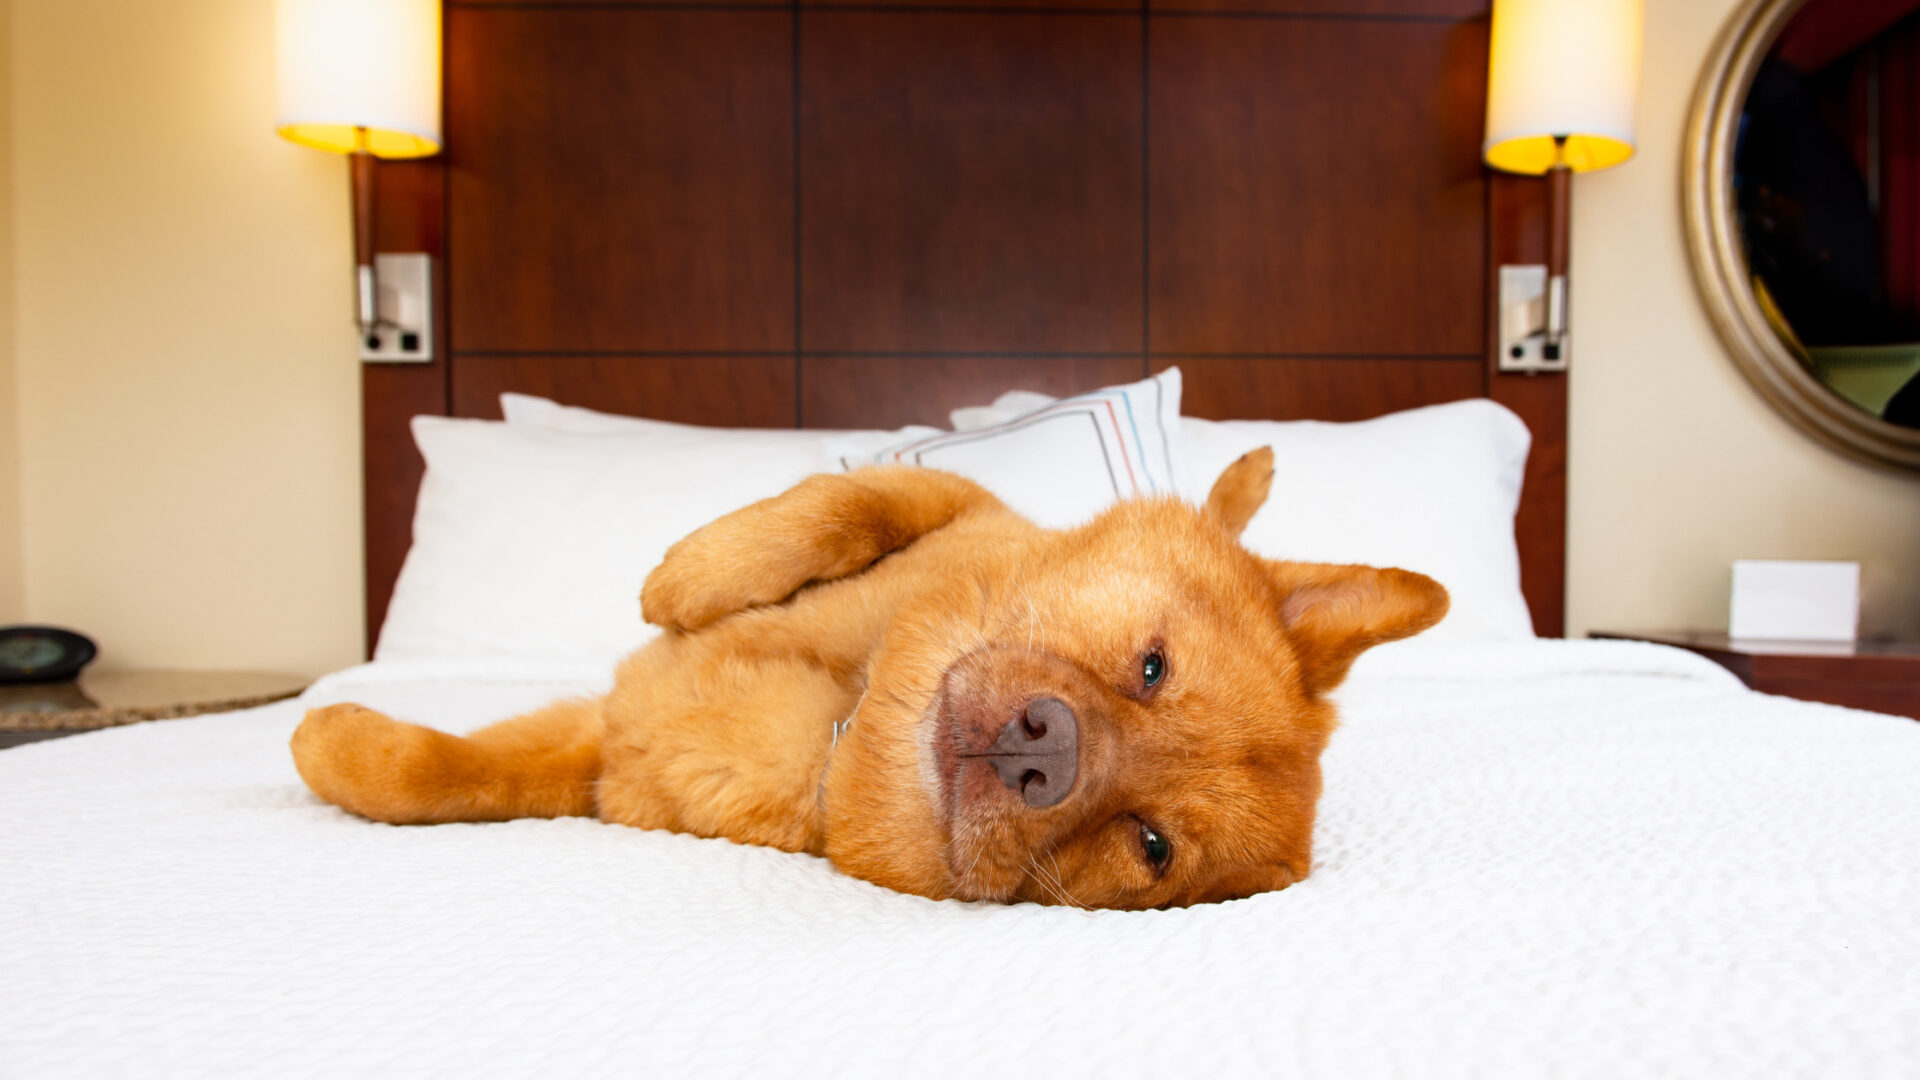 Pet-Friendly Hotels in Dubai: A Curated List for Pet Owners